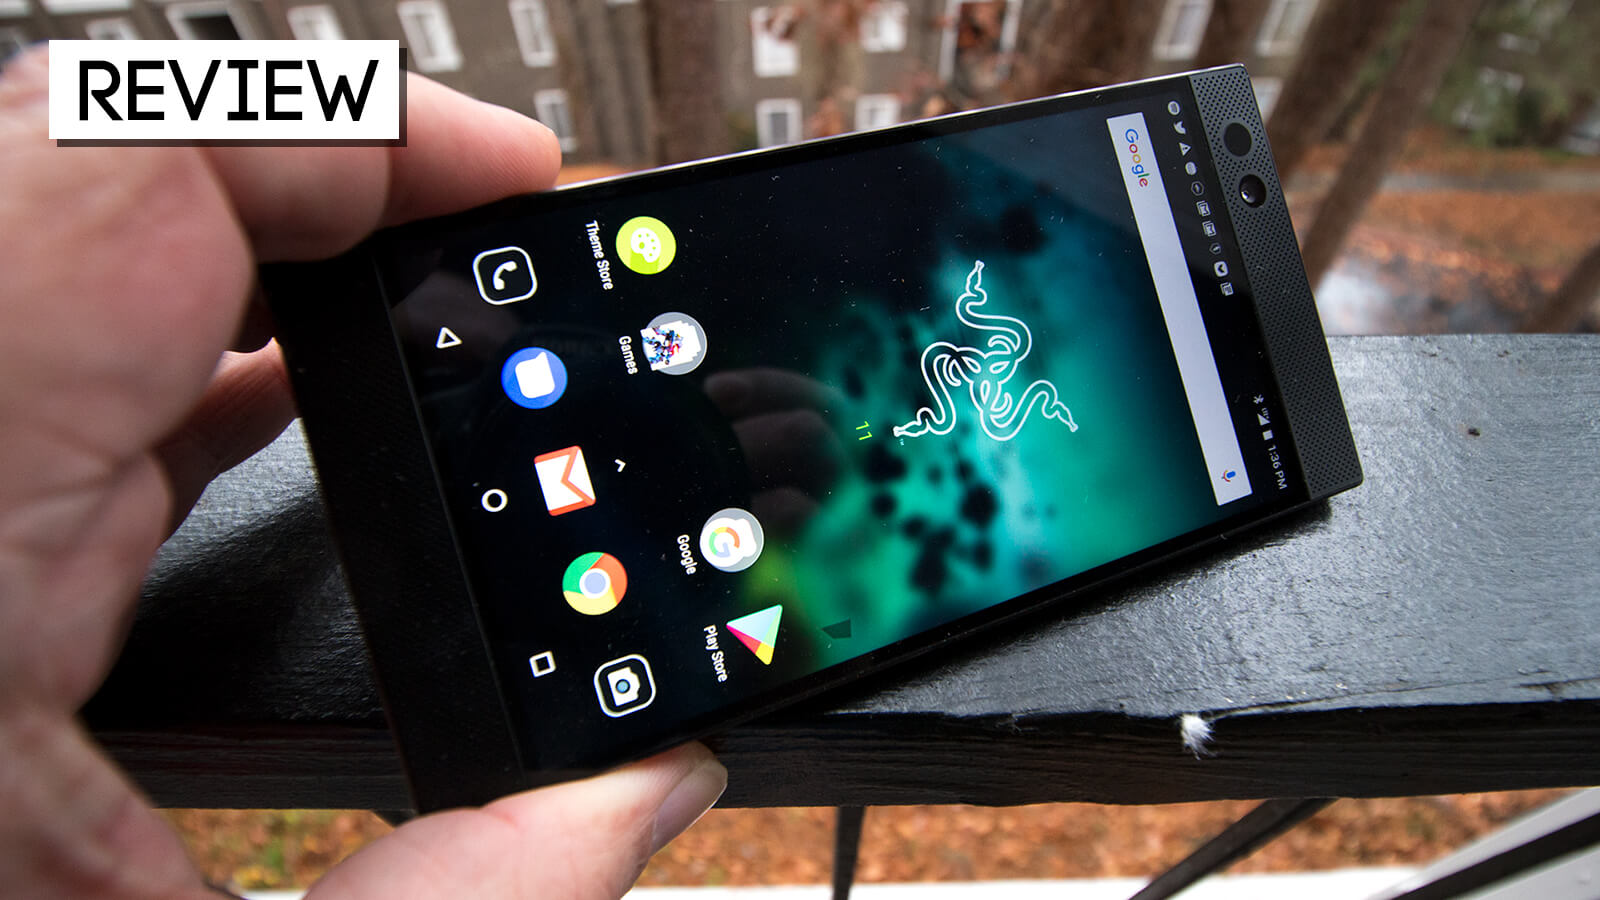 The new Razer Phone as reviewed by a gamer